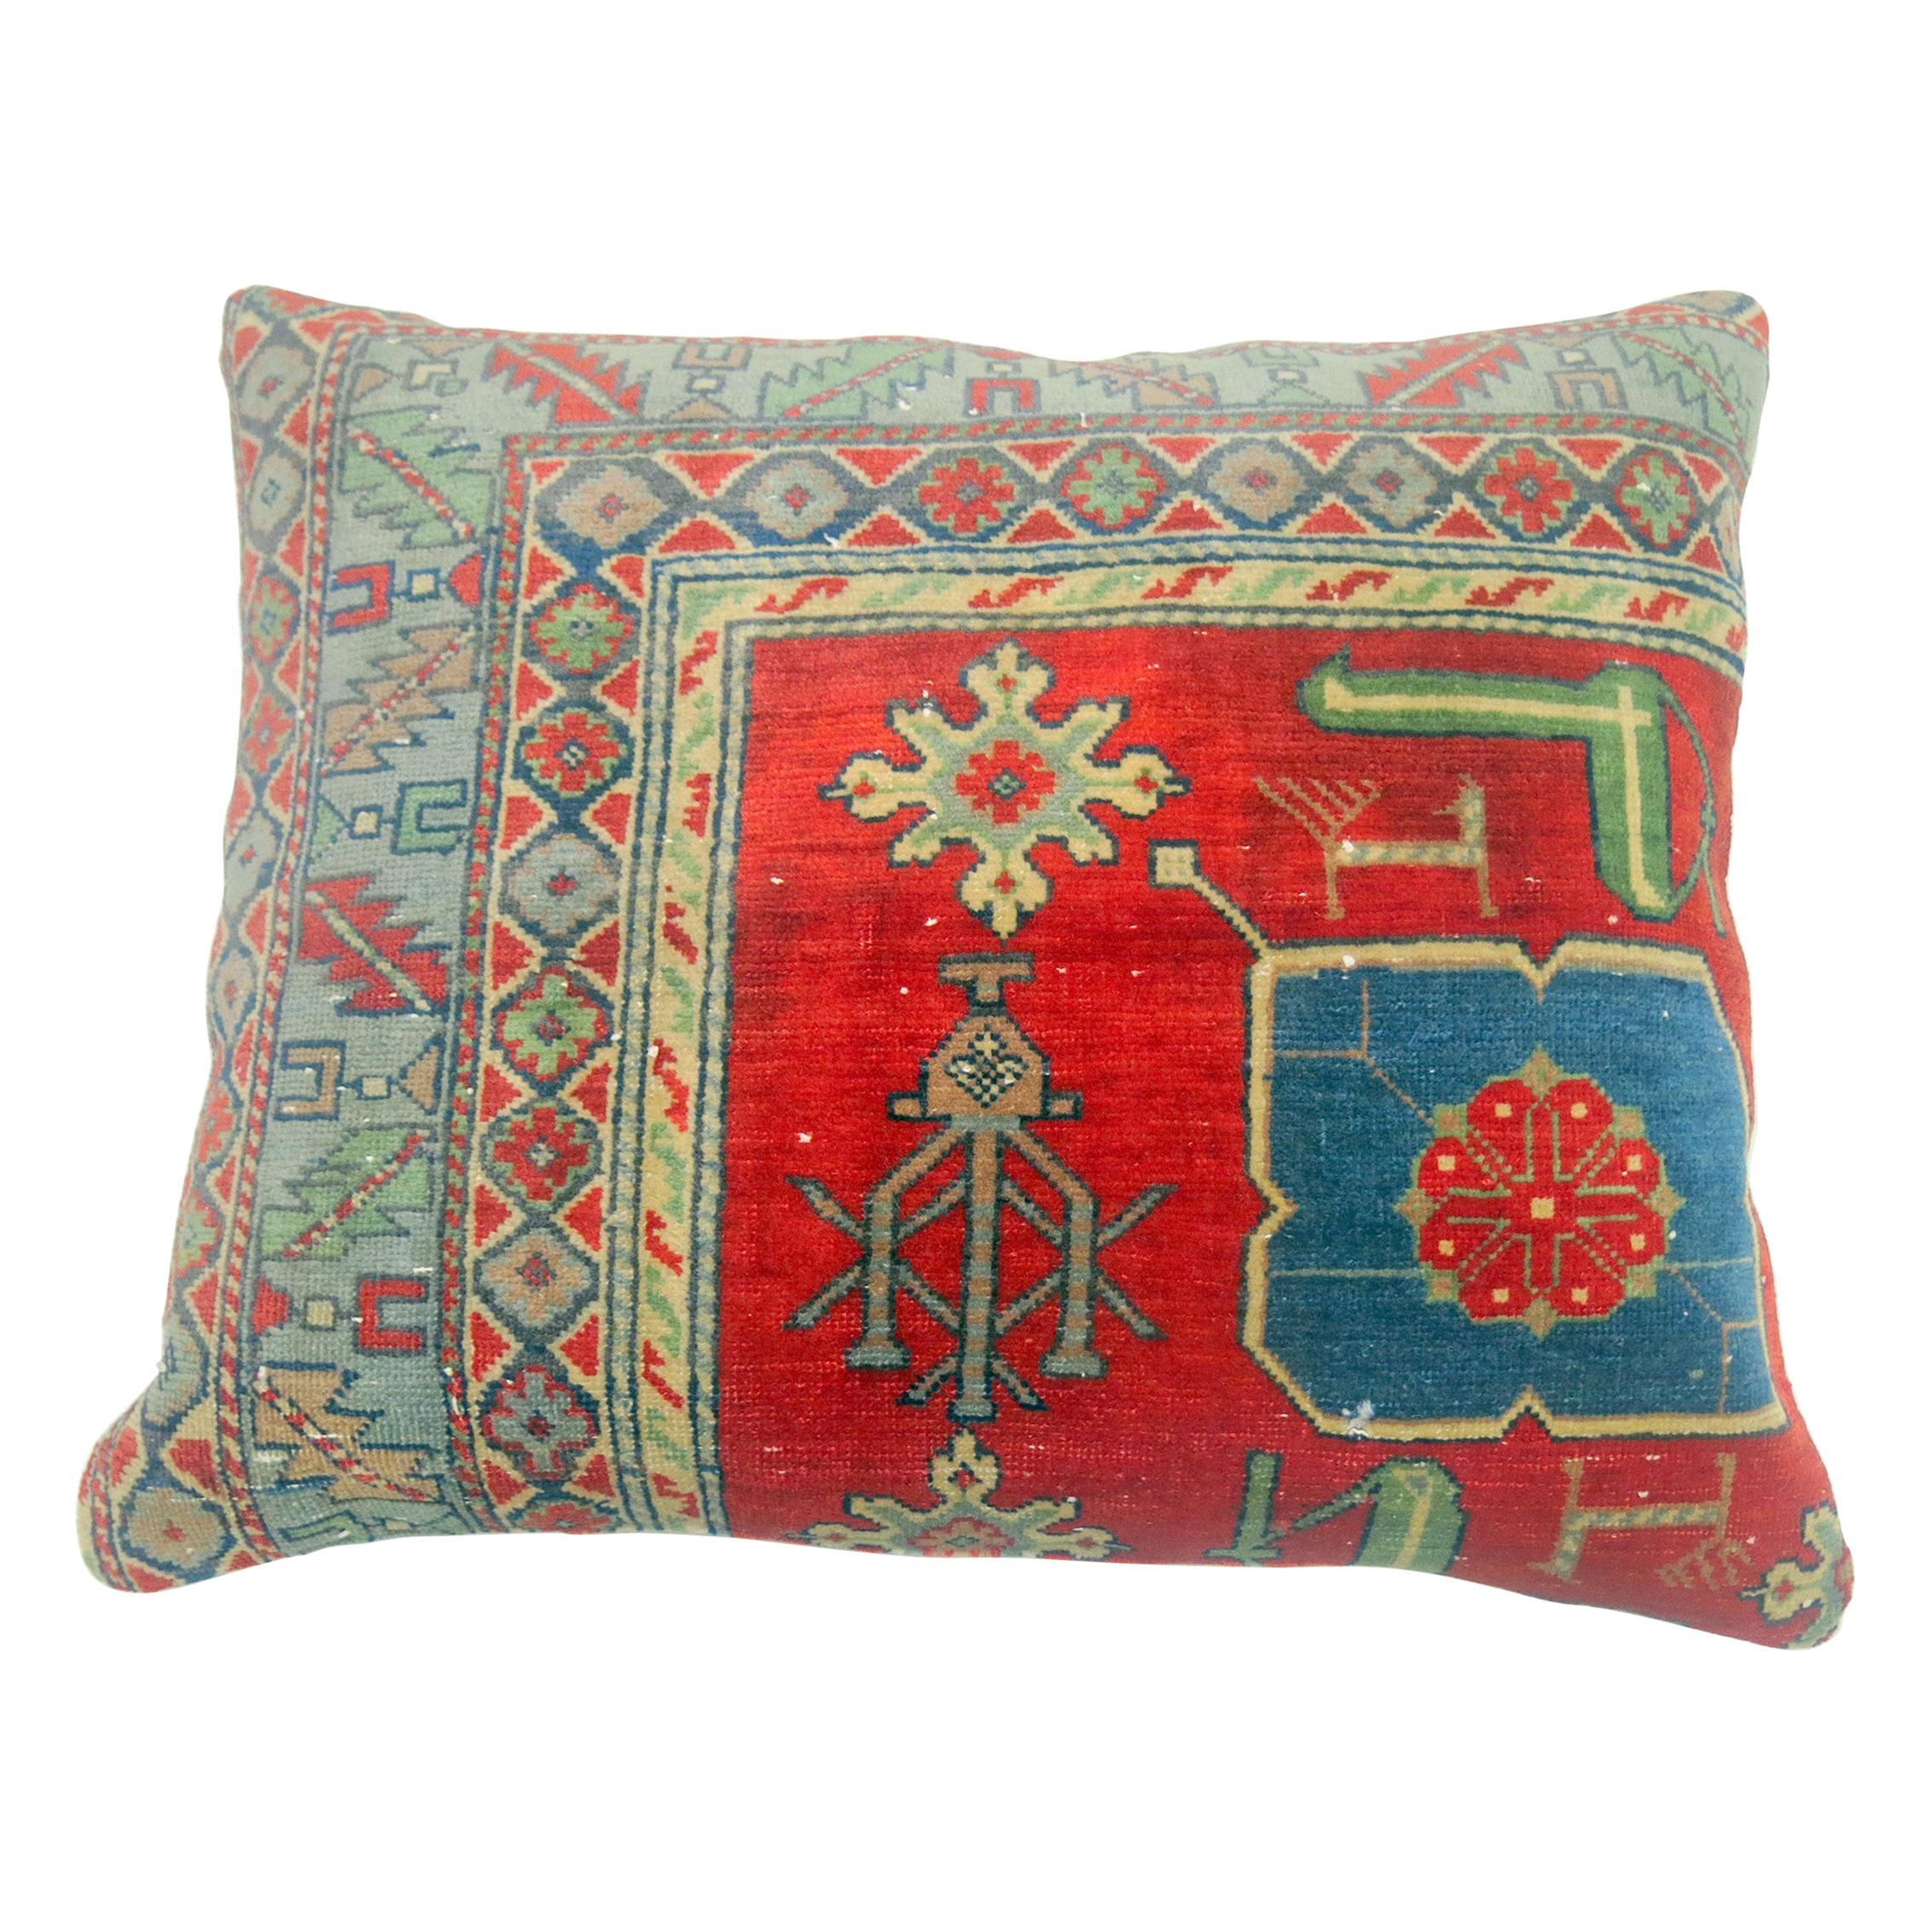 Colorful Antique Rug Pillow